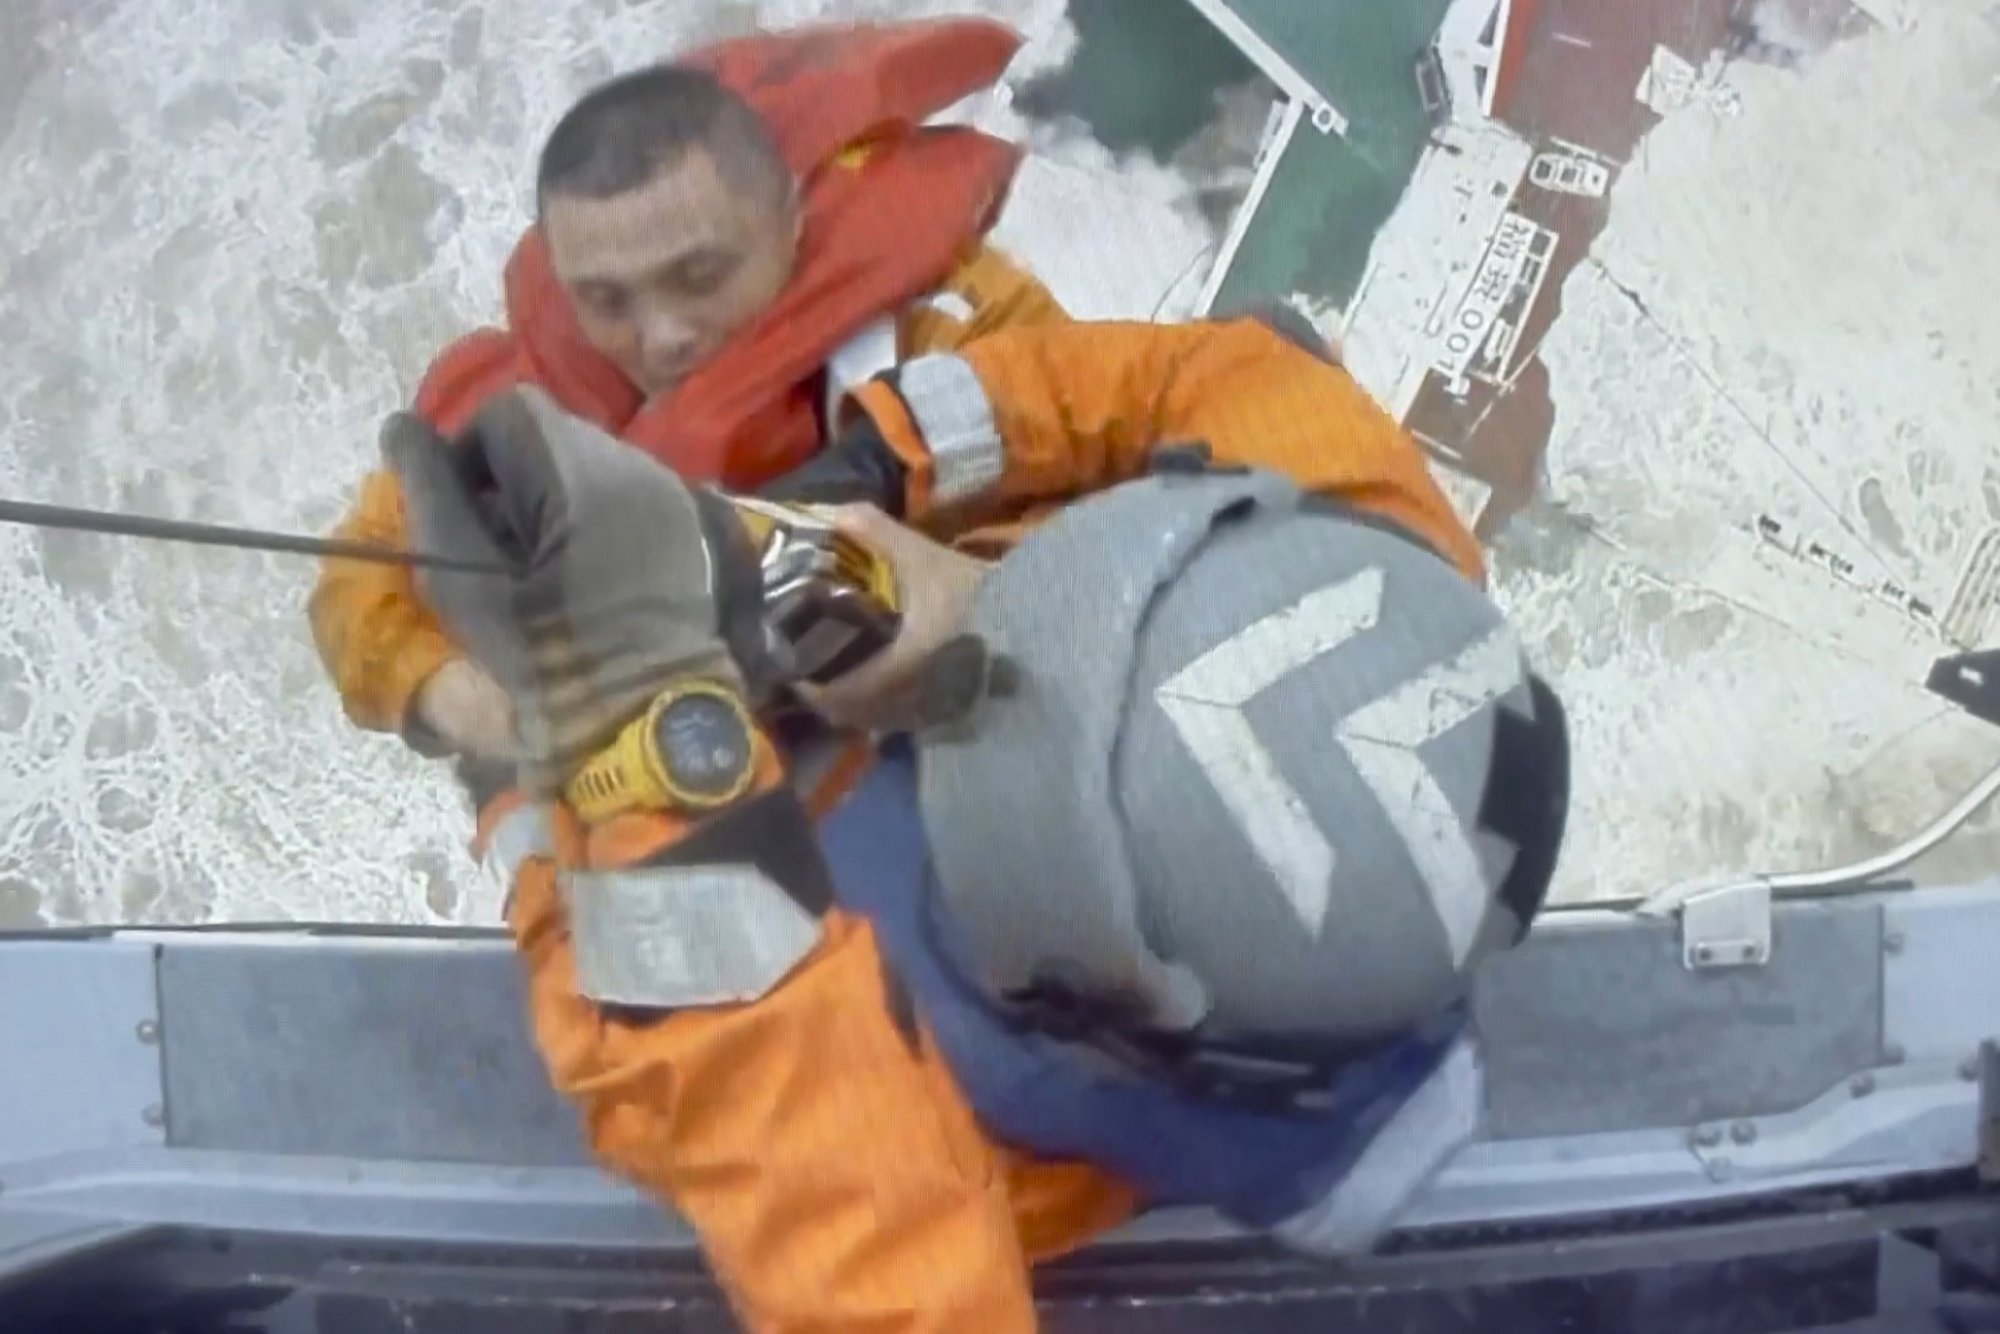 In this image released by Hong Kong Government Flying Service, helicopter crew members winch up a man from a sinking ship in the South China Sea, 300 kilometers (186 miles) south of Hong Kong, July 2, 2022, as Typhoon Chaba was moving in the area. The industrial support ship operating in the South China Sea has sunk with the possible loss of more than two dozen crew members, rescue services in Hong Kong said Saturday. (Hong Kong Government Flying Service via AP)